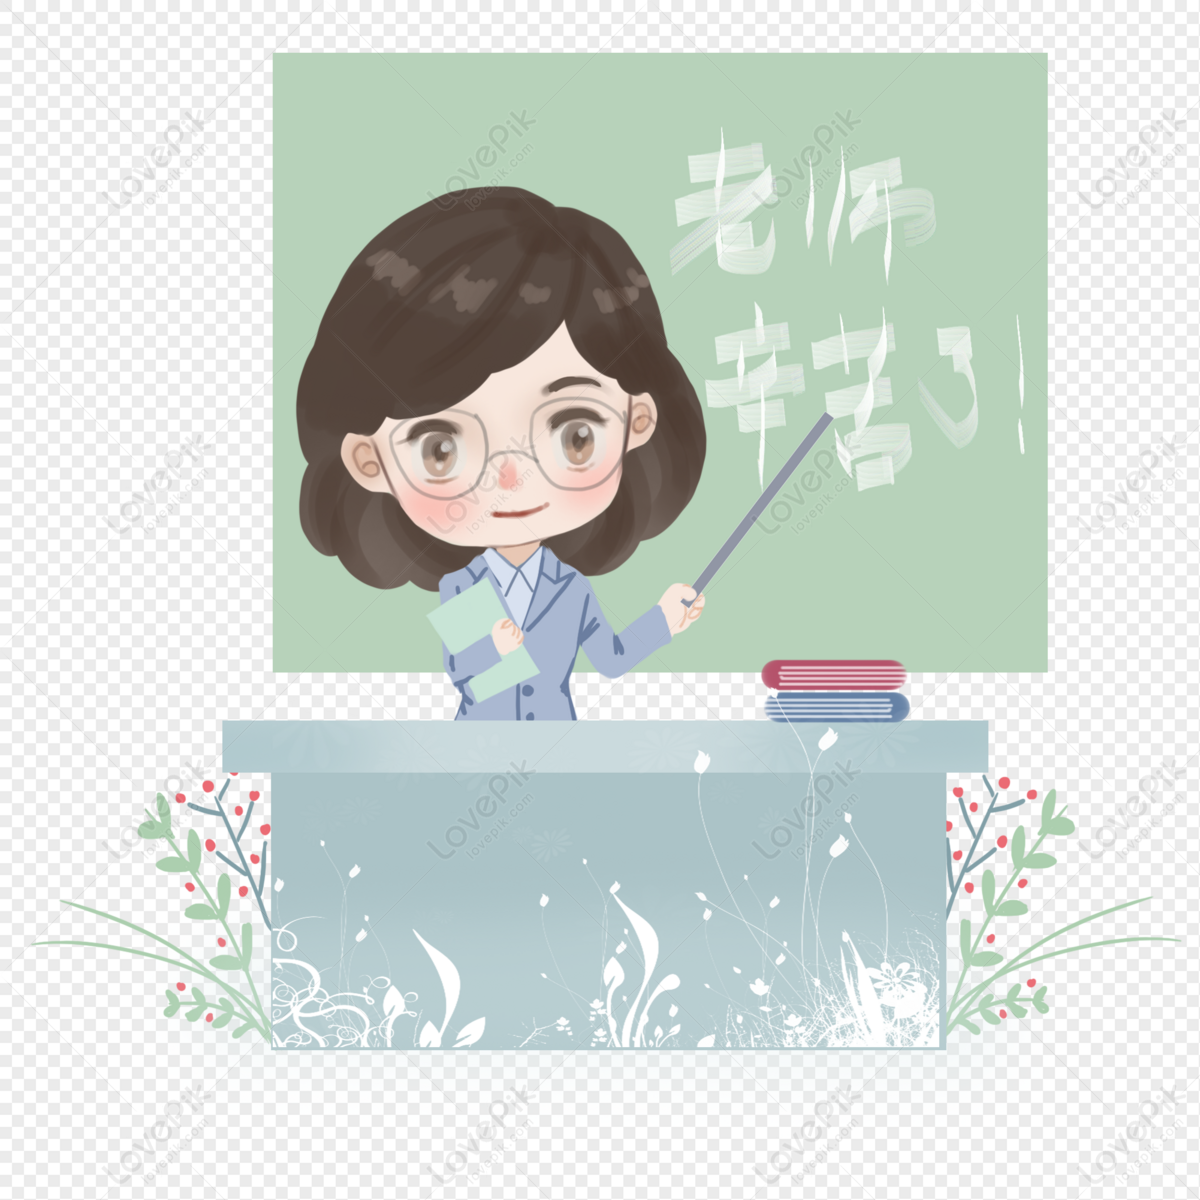 Old Teacher PNG Images With Transparent Background | Free Download ...